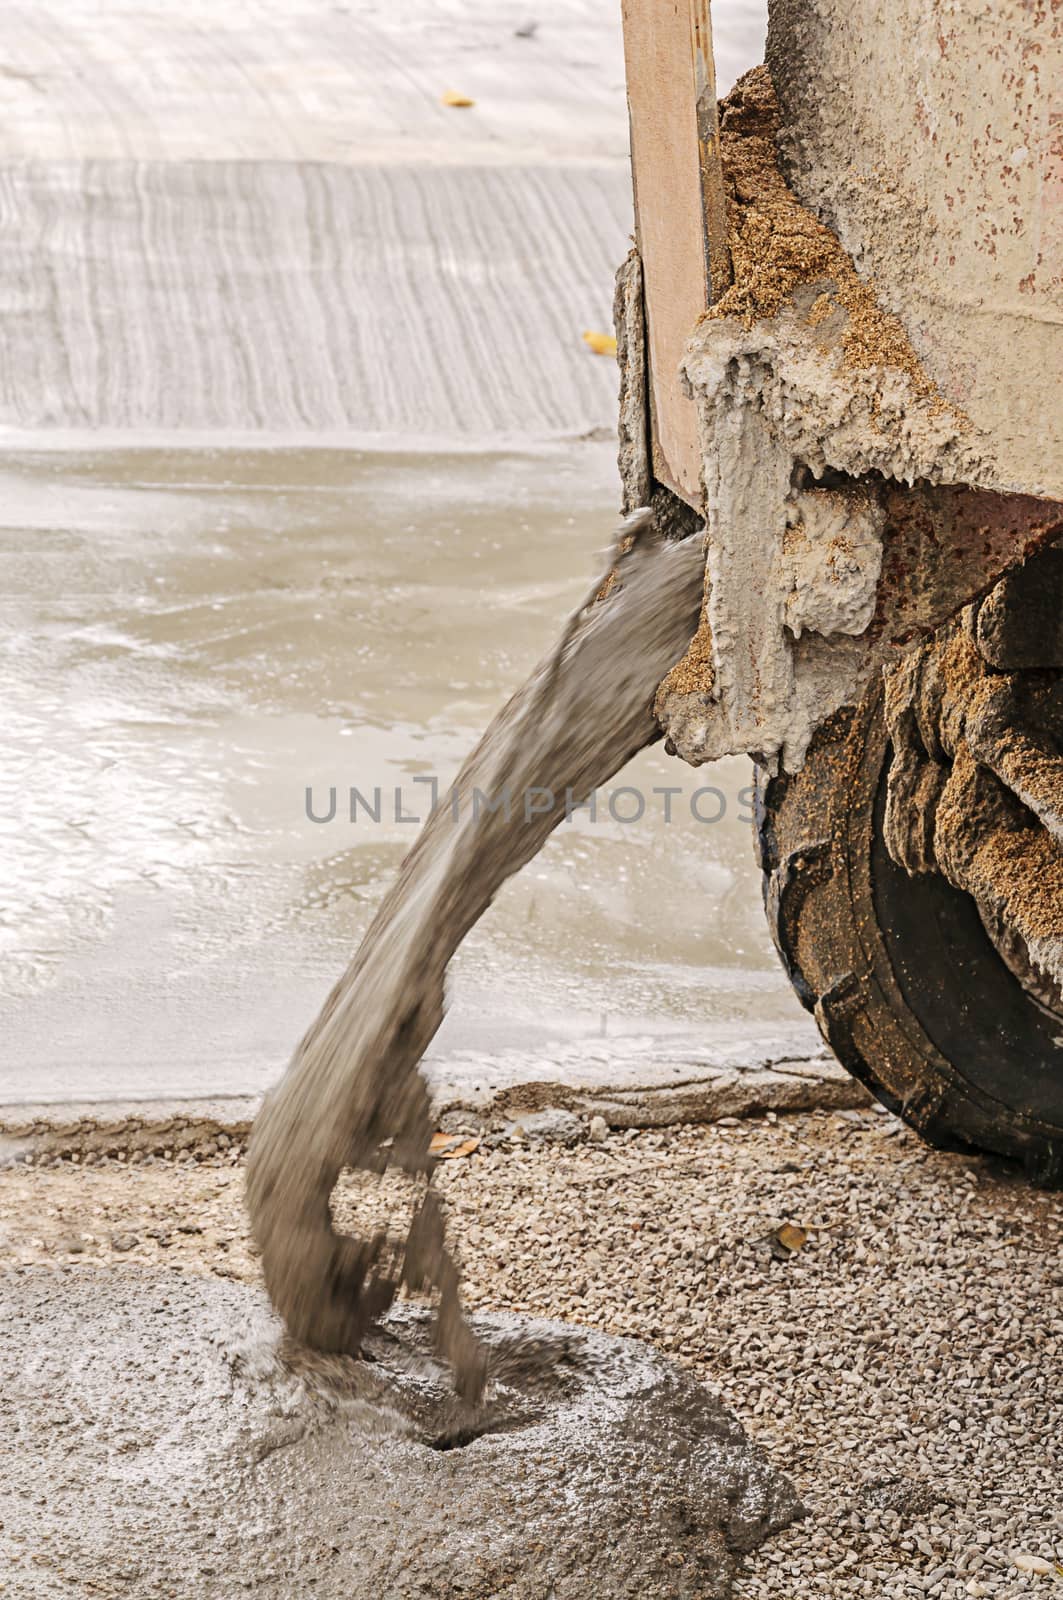 Pouring cement by NuwatPhoto